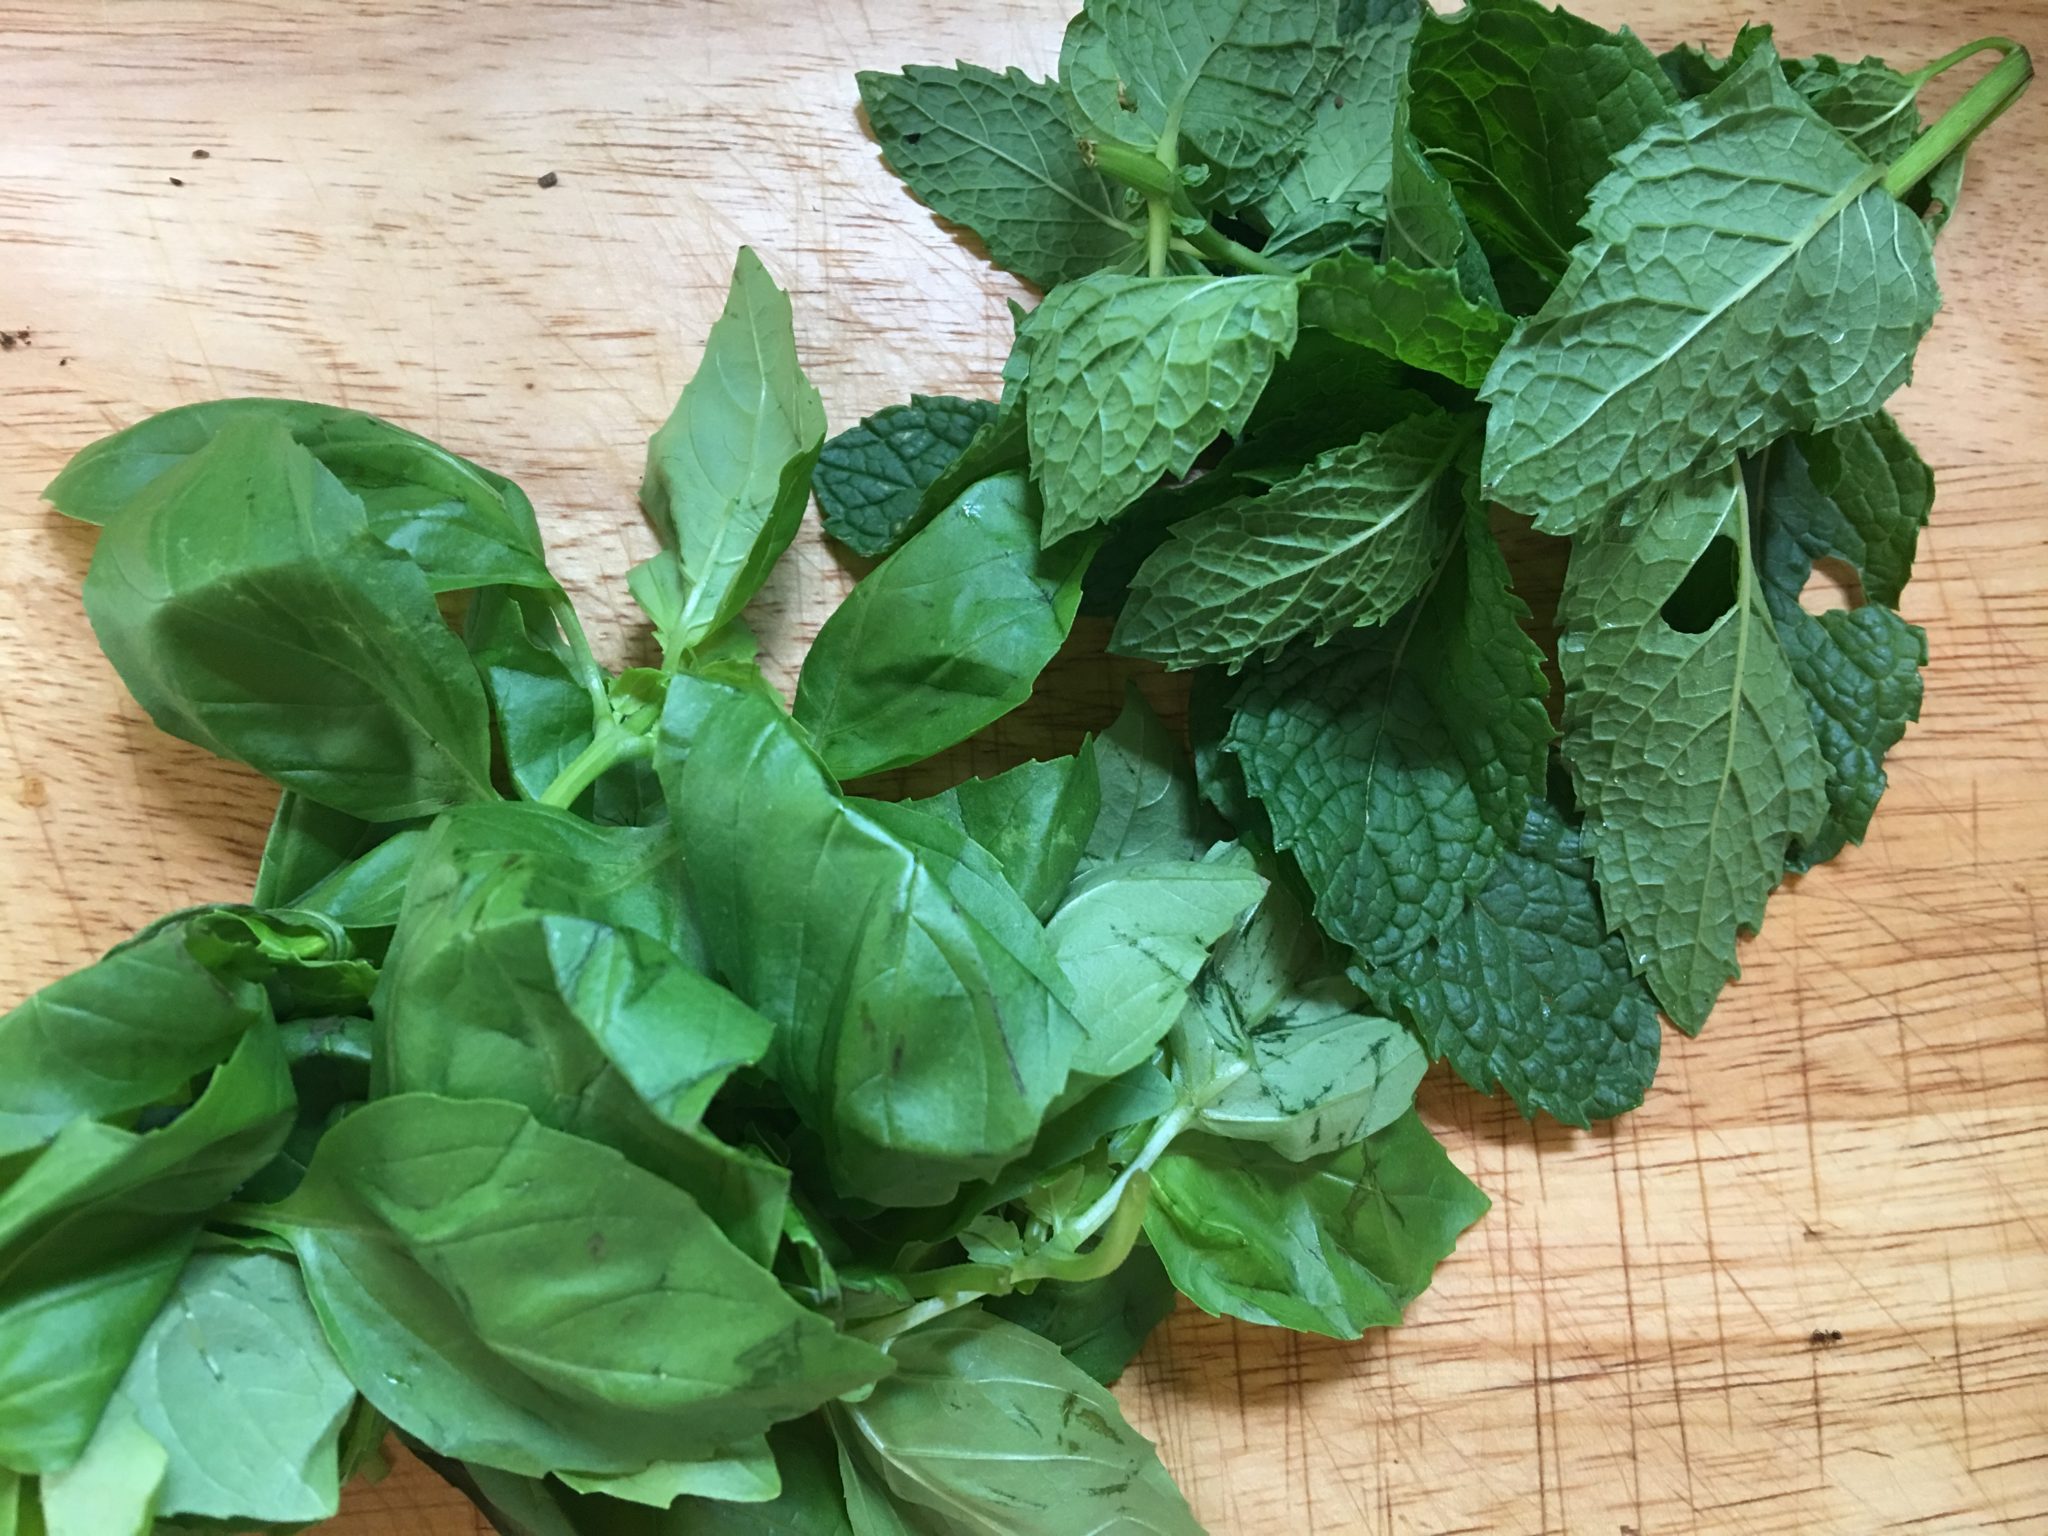 Basil and mint leaves